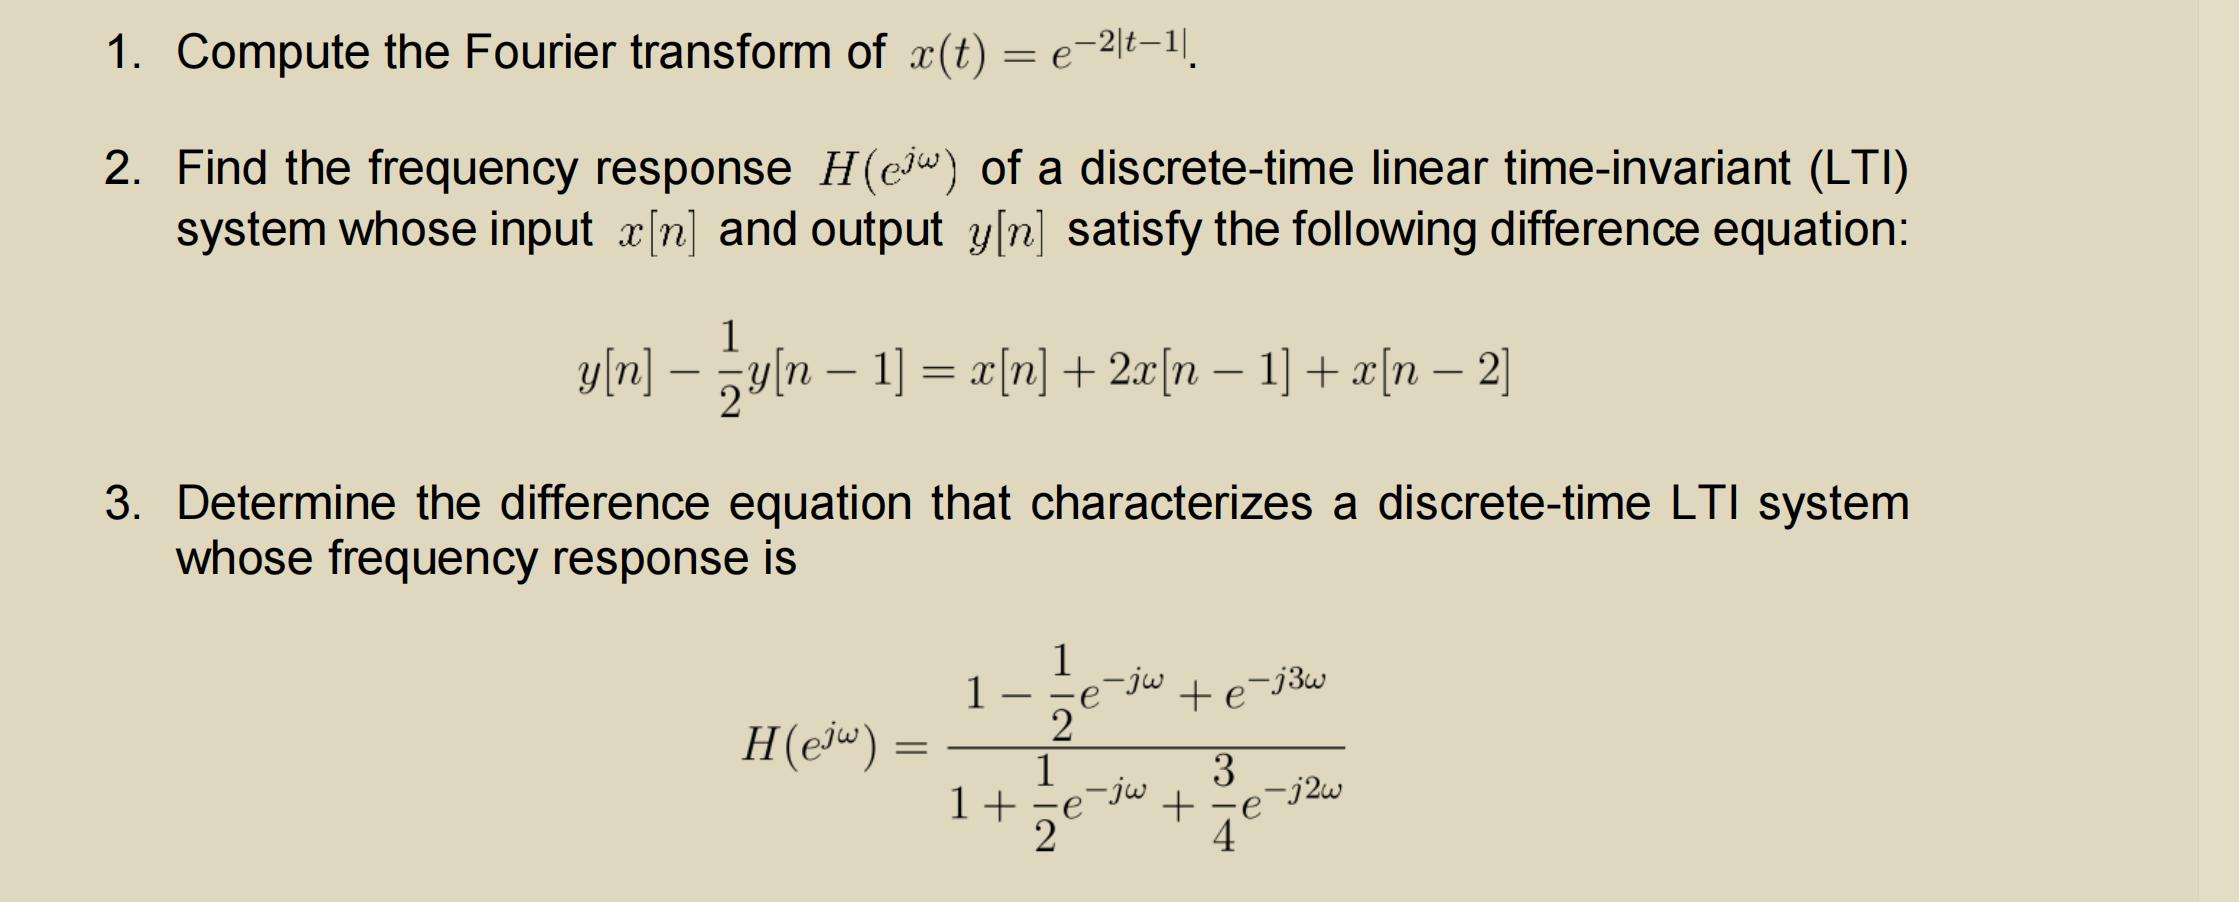 1. Compute the Fourier transform of x(t) = e-|t1| 2. Find the frequency response H(e) of a discrete-time